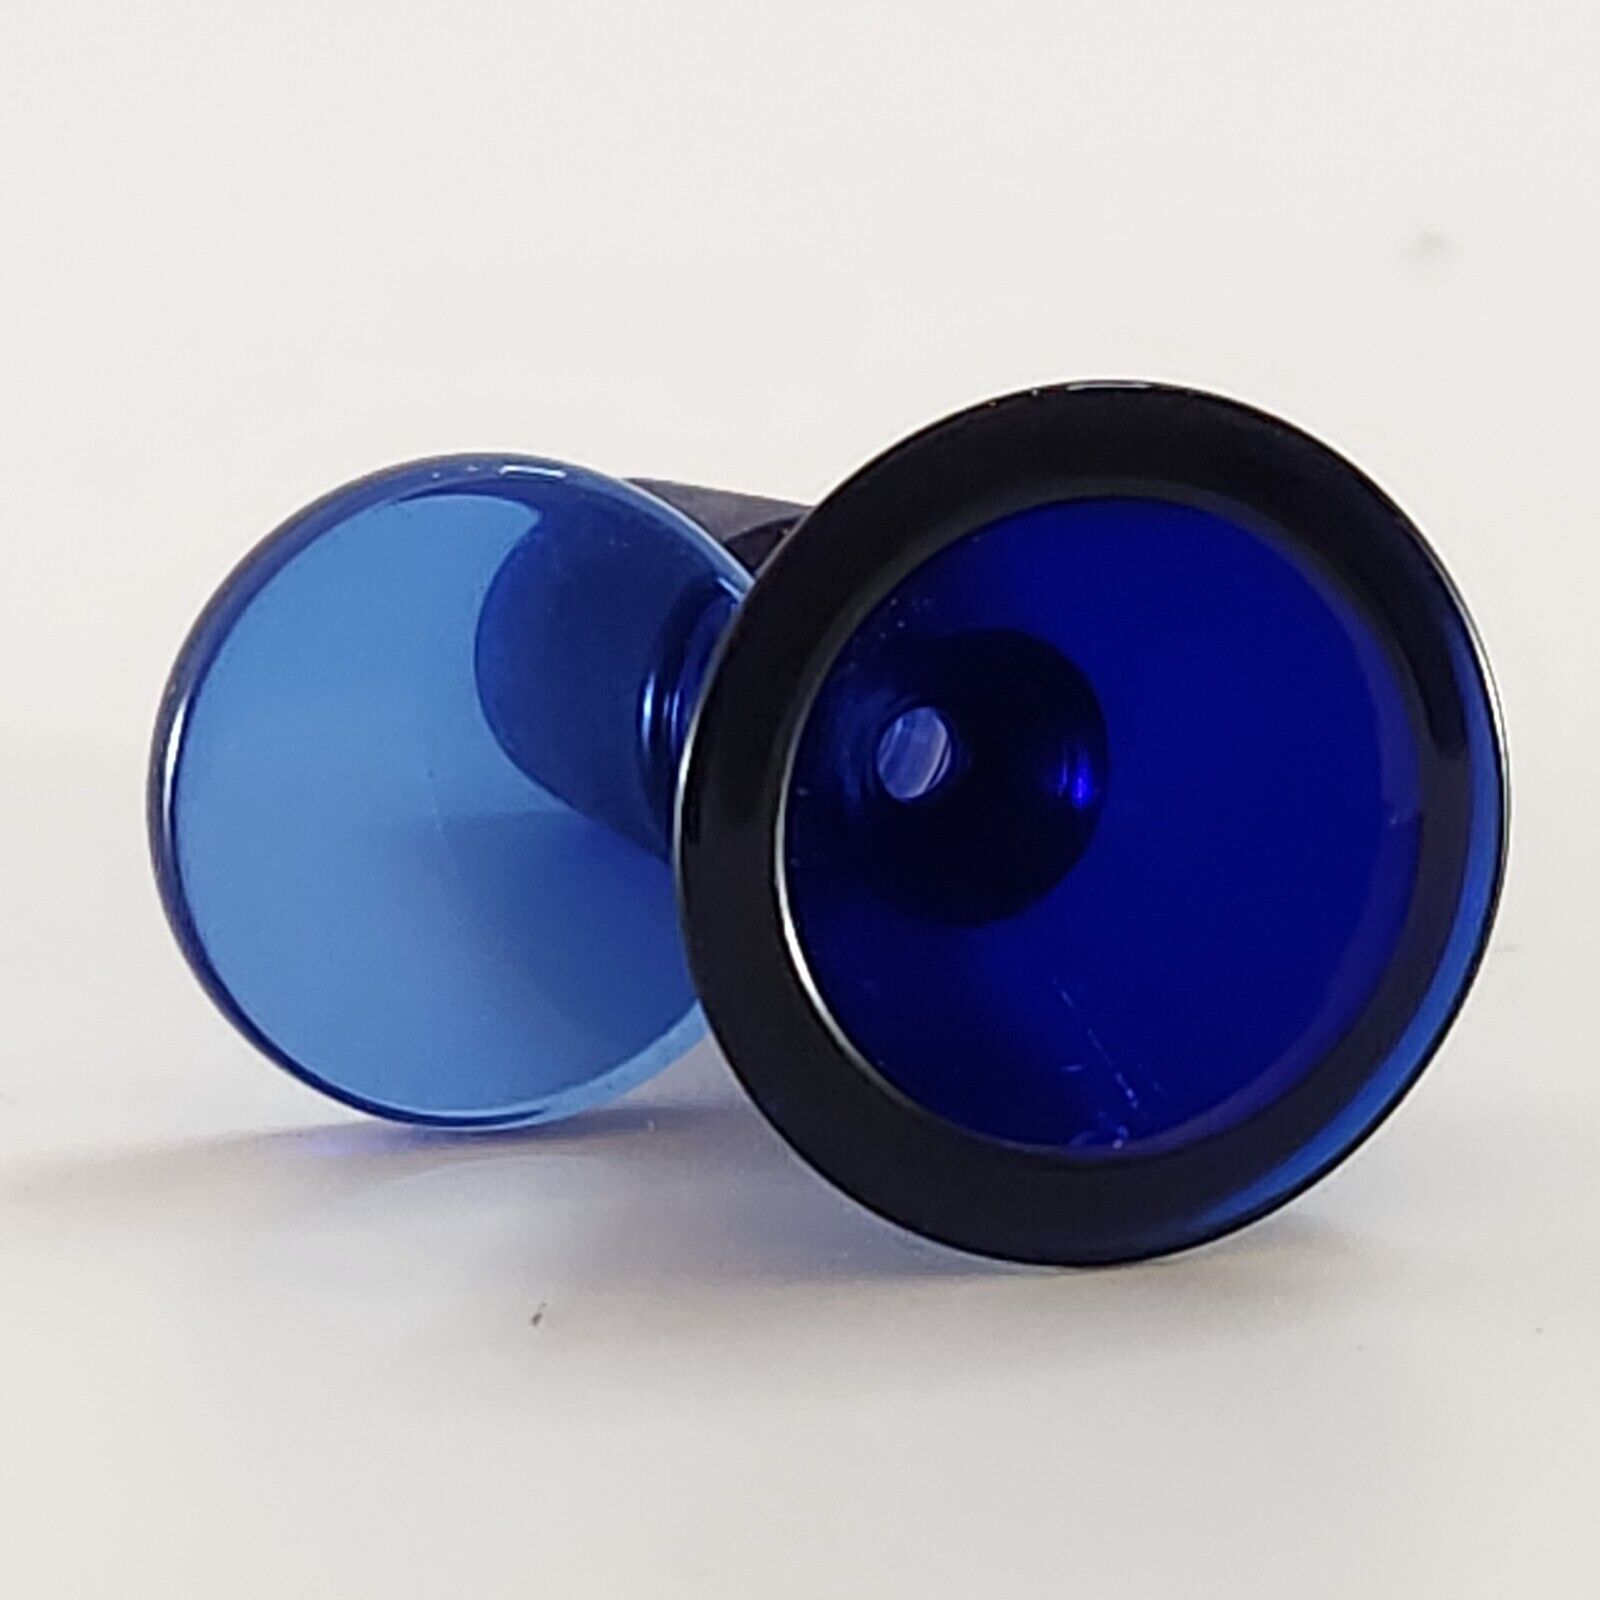 14mm Cool Solid BLUE Funnel Replacement Hookah Slider Bowl Head Piece